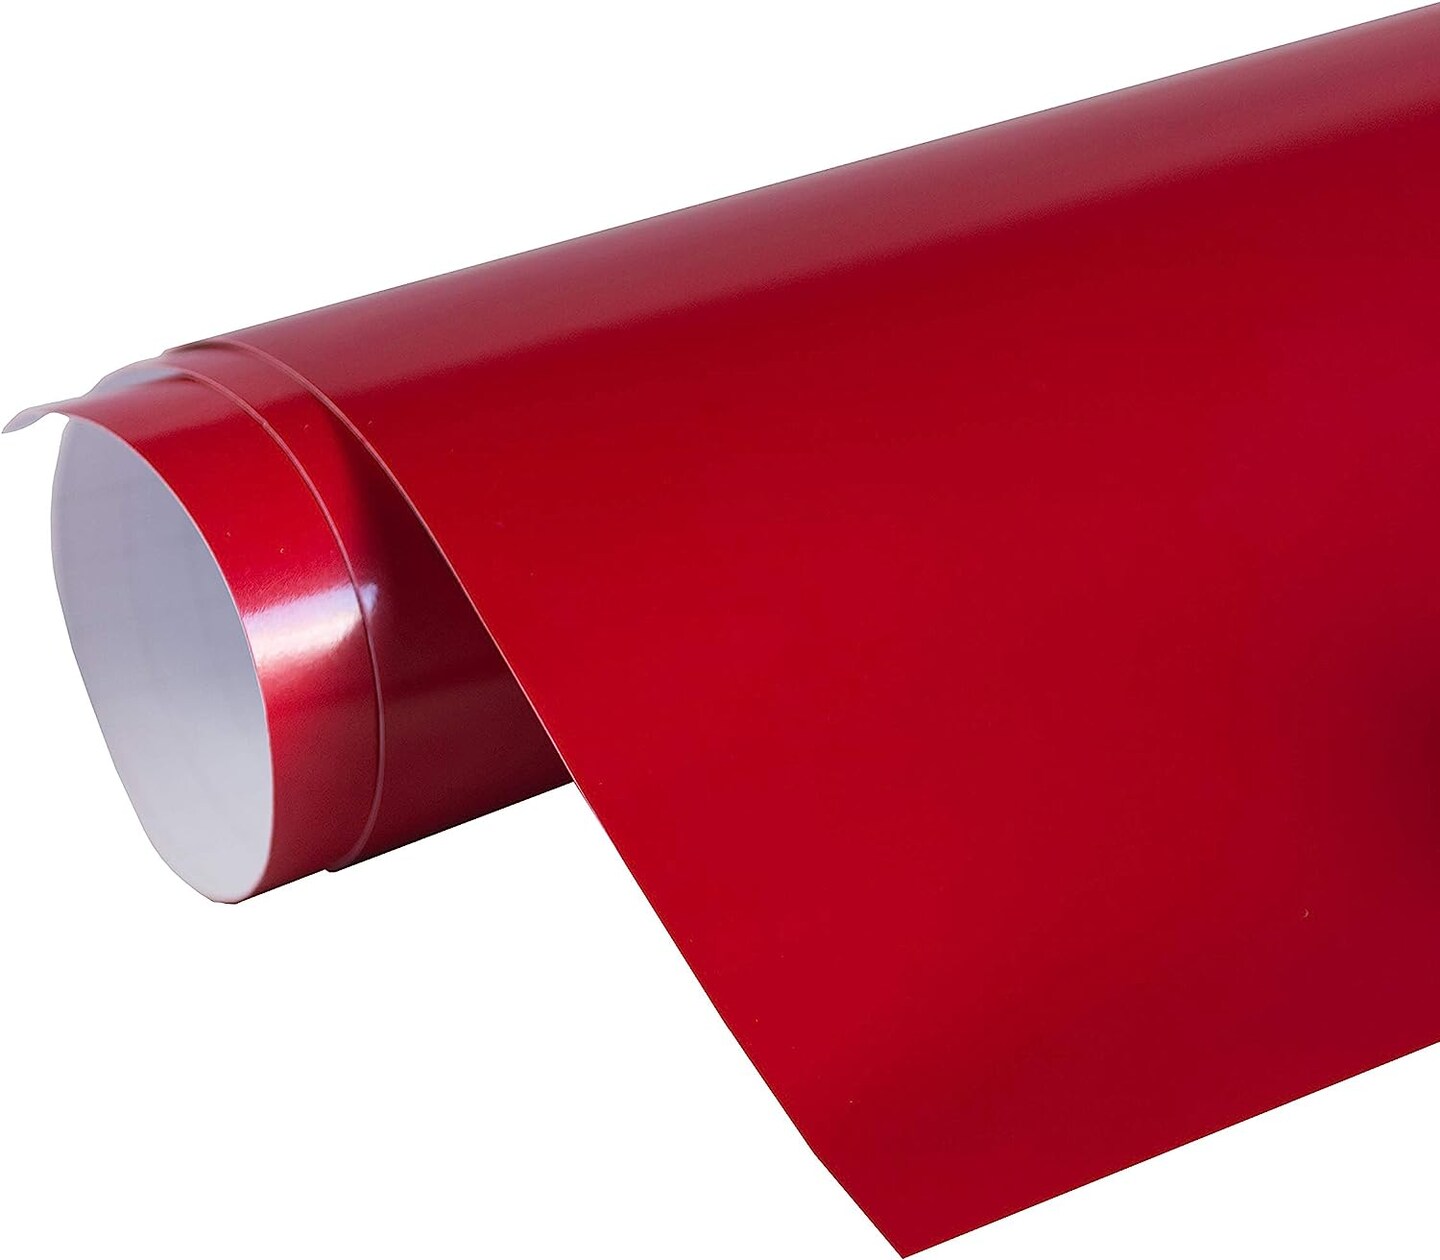 24" x 10 ft Roll of Clear Repositionable Adhesive-Backed Vinyl for Craft Cutters, Punches and Vinyl Sign Cutters